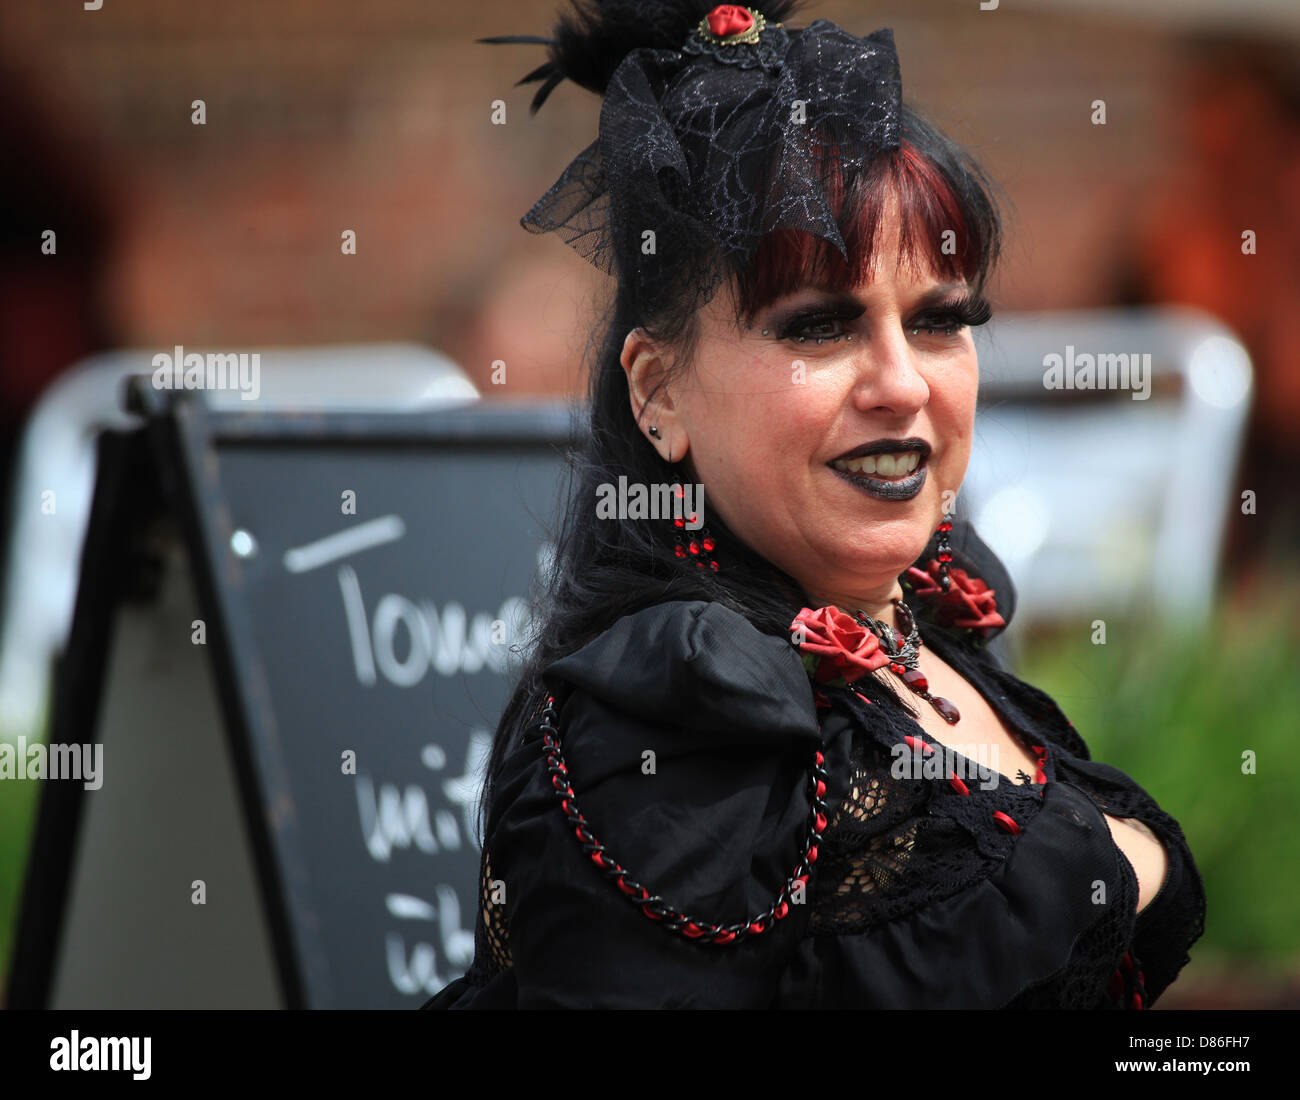 Portrait of one of the visitors at the annual open air art and (dark) music festival Wave-Gotik-Treffen (WGT) in Leipzig,Germany Stock Photo